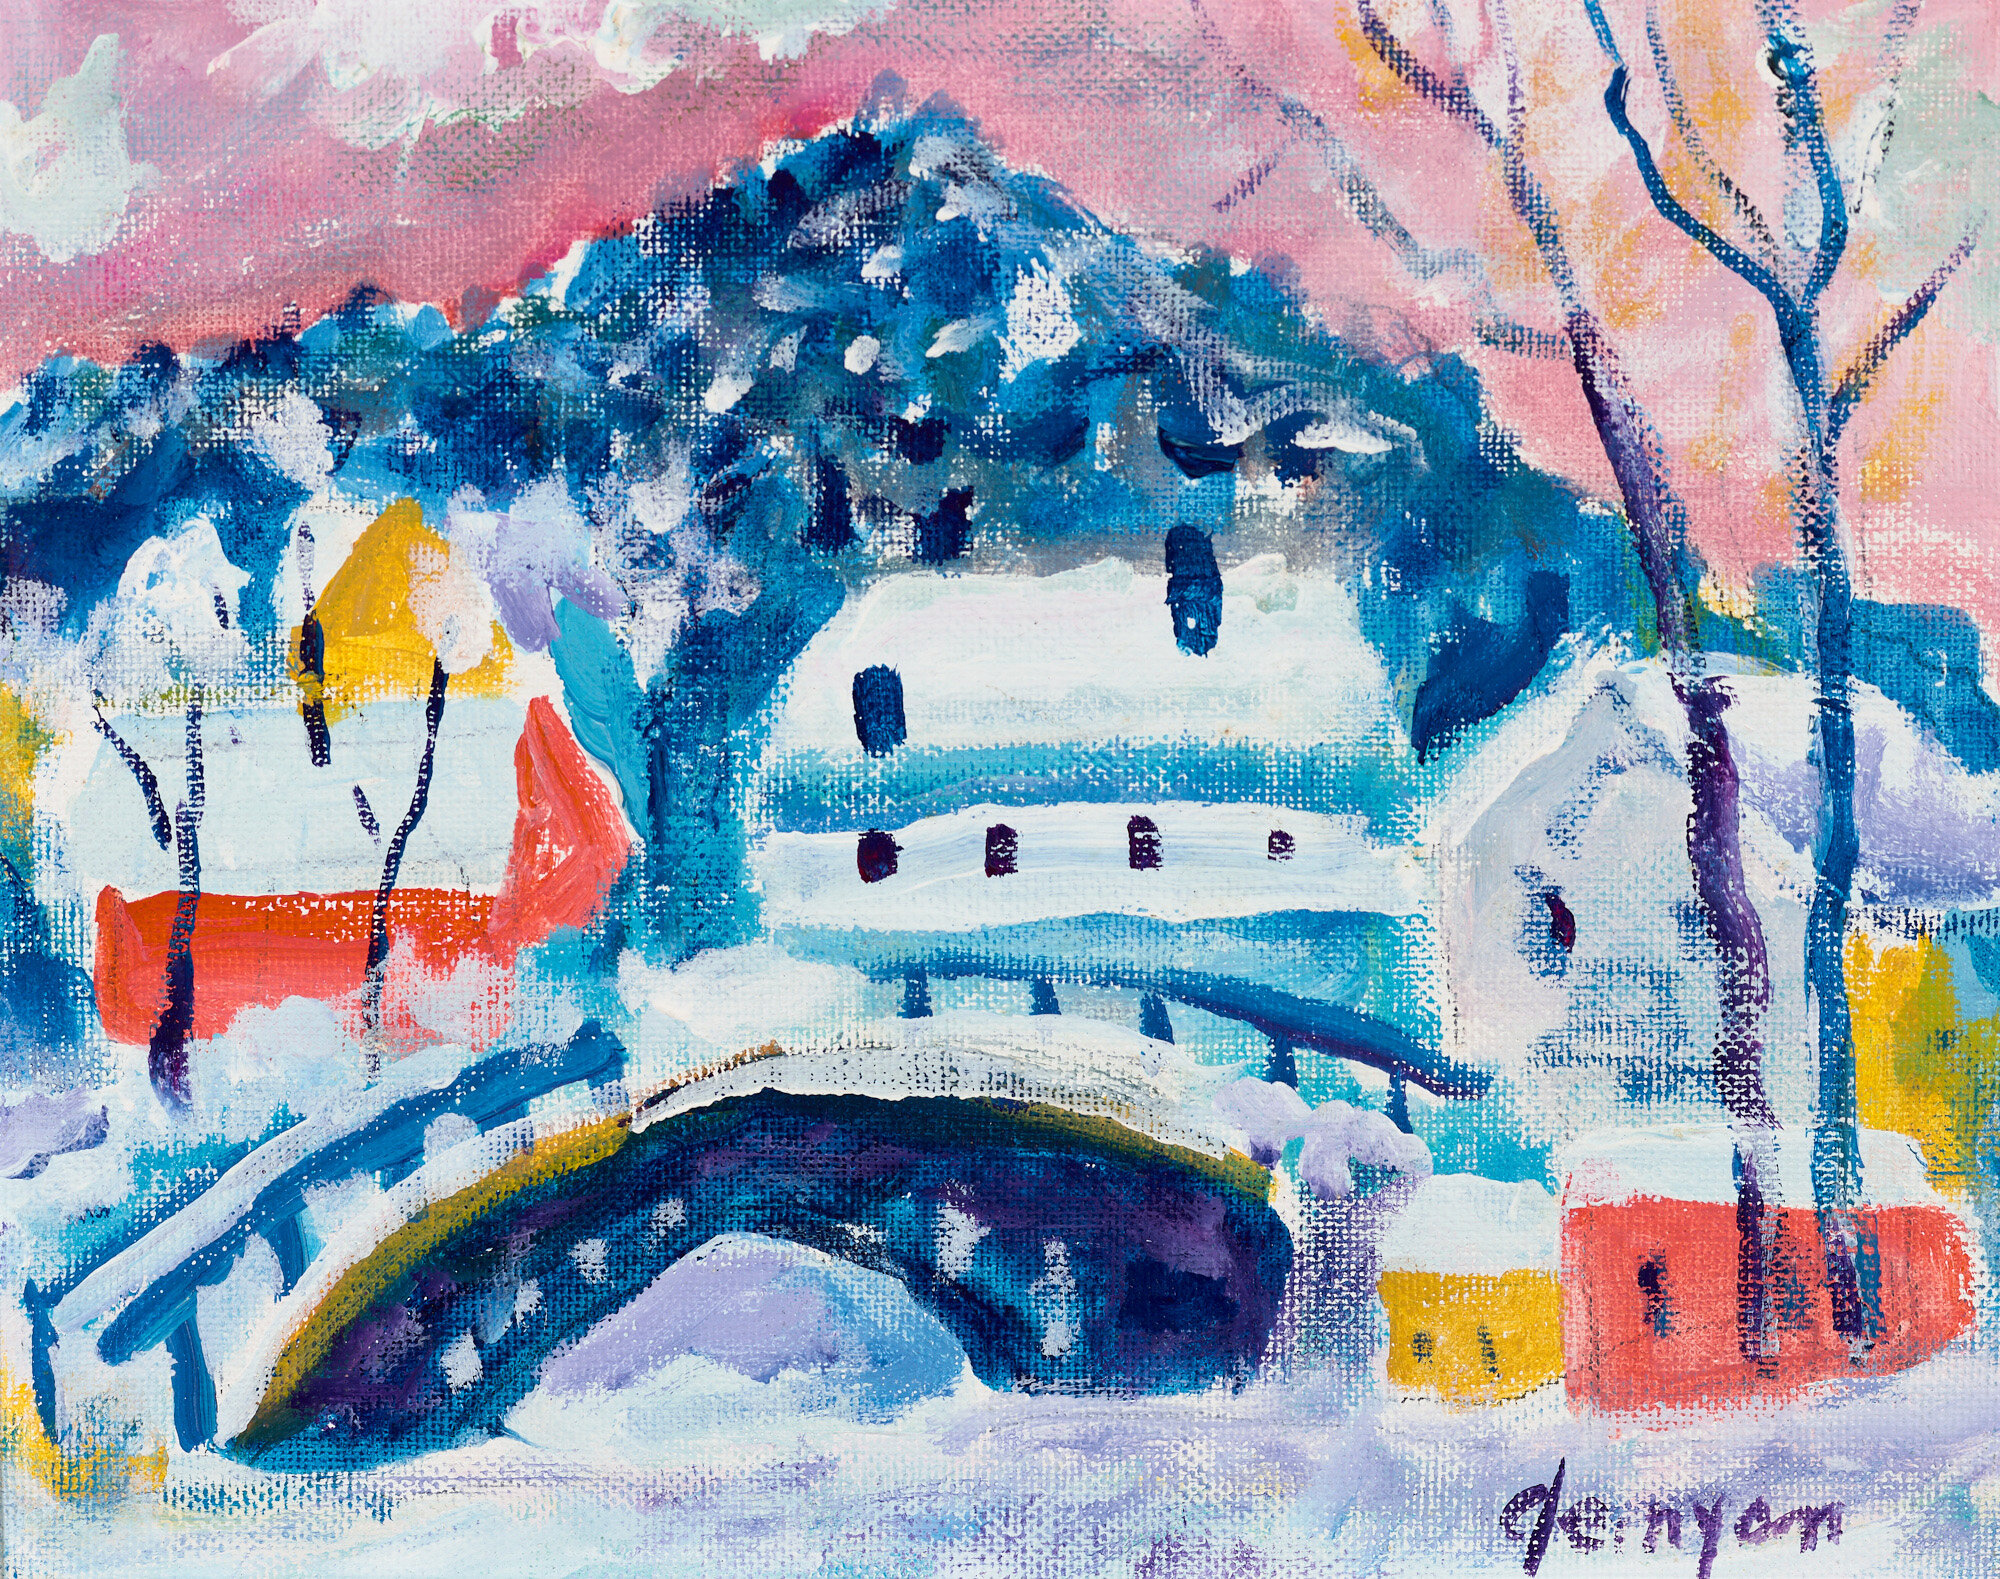  Jack Demyan (1923-1999)  Untitled (winter scene)  Acrylic on canvas, date unknown, 7 ¼” x 9 ¼”  